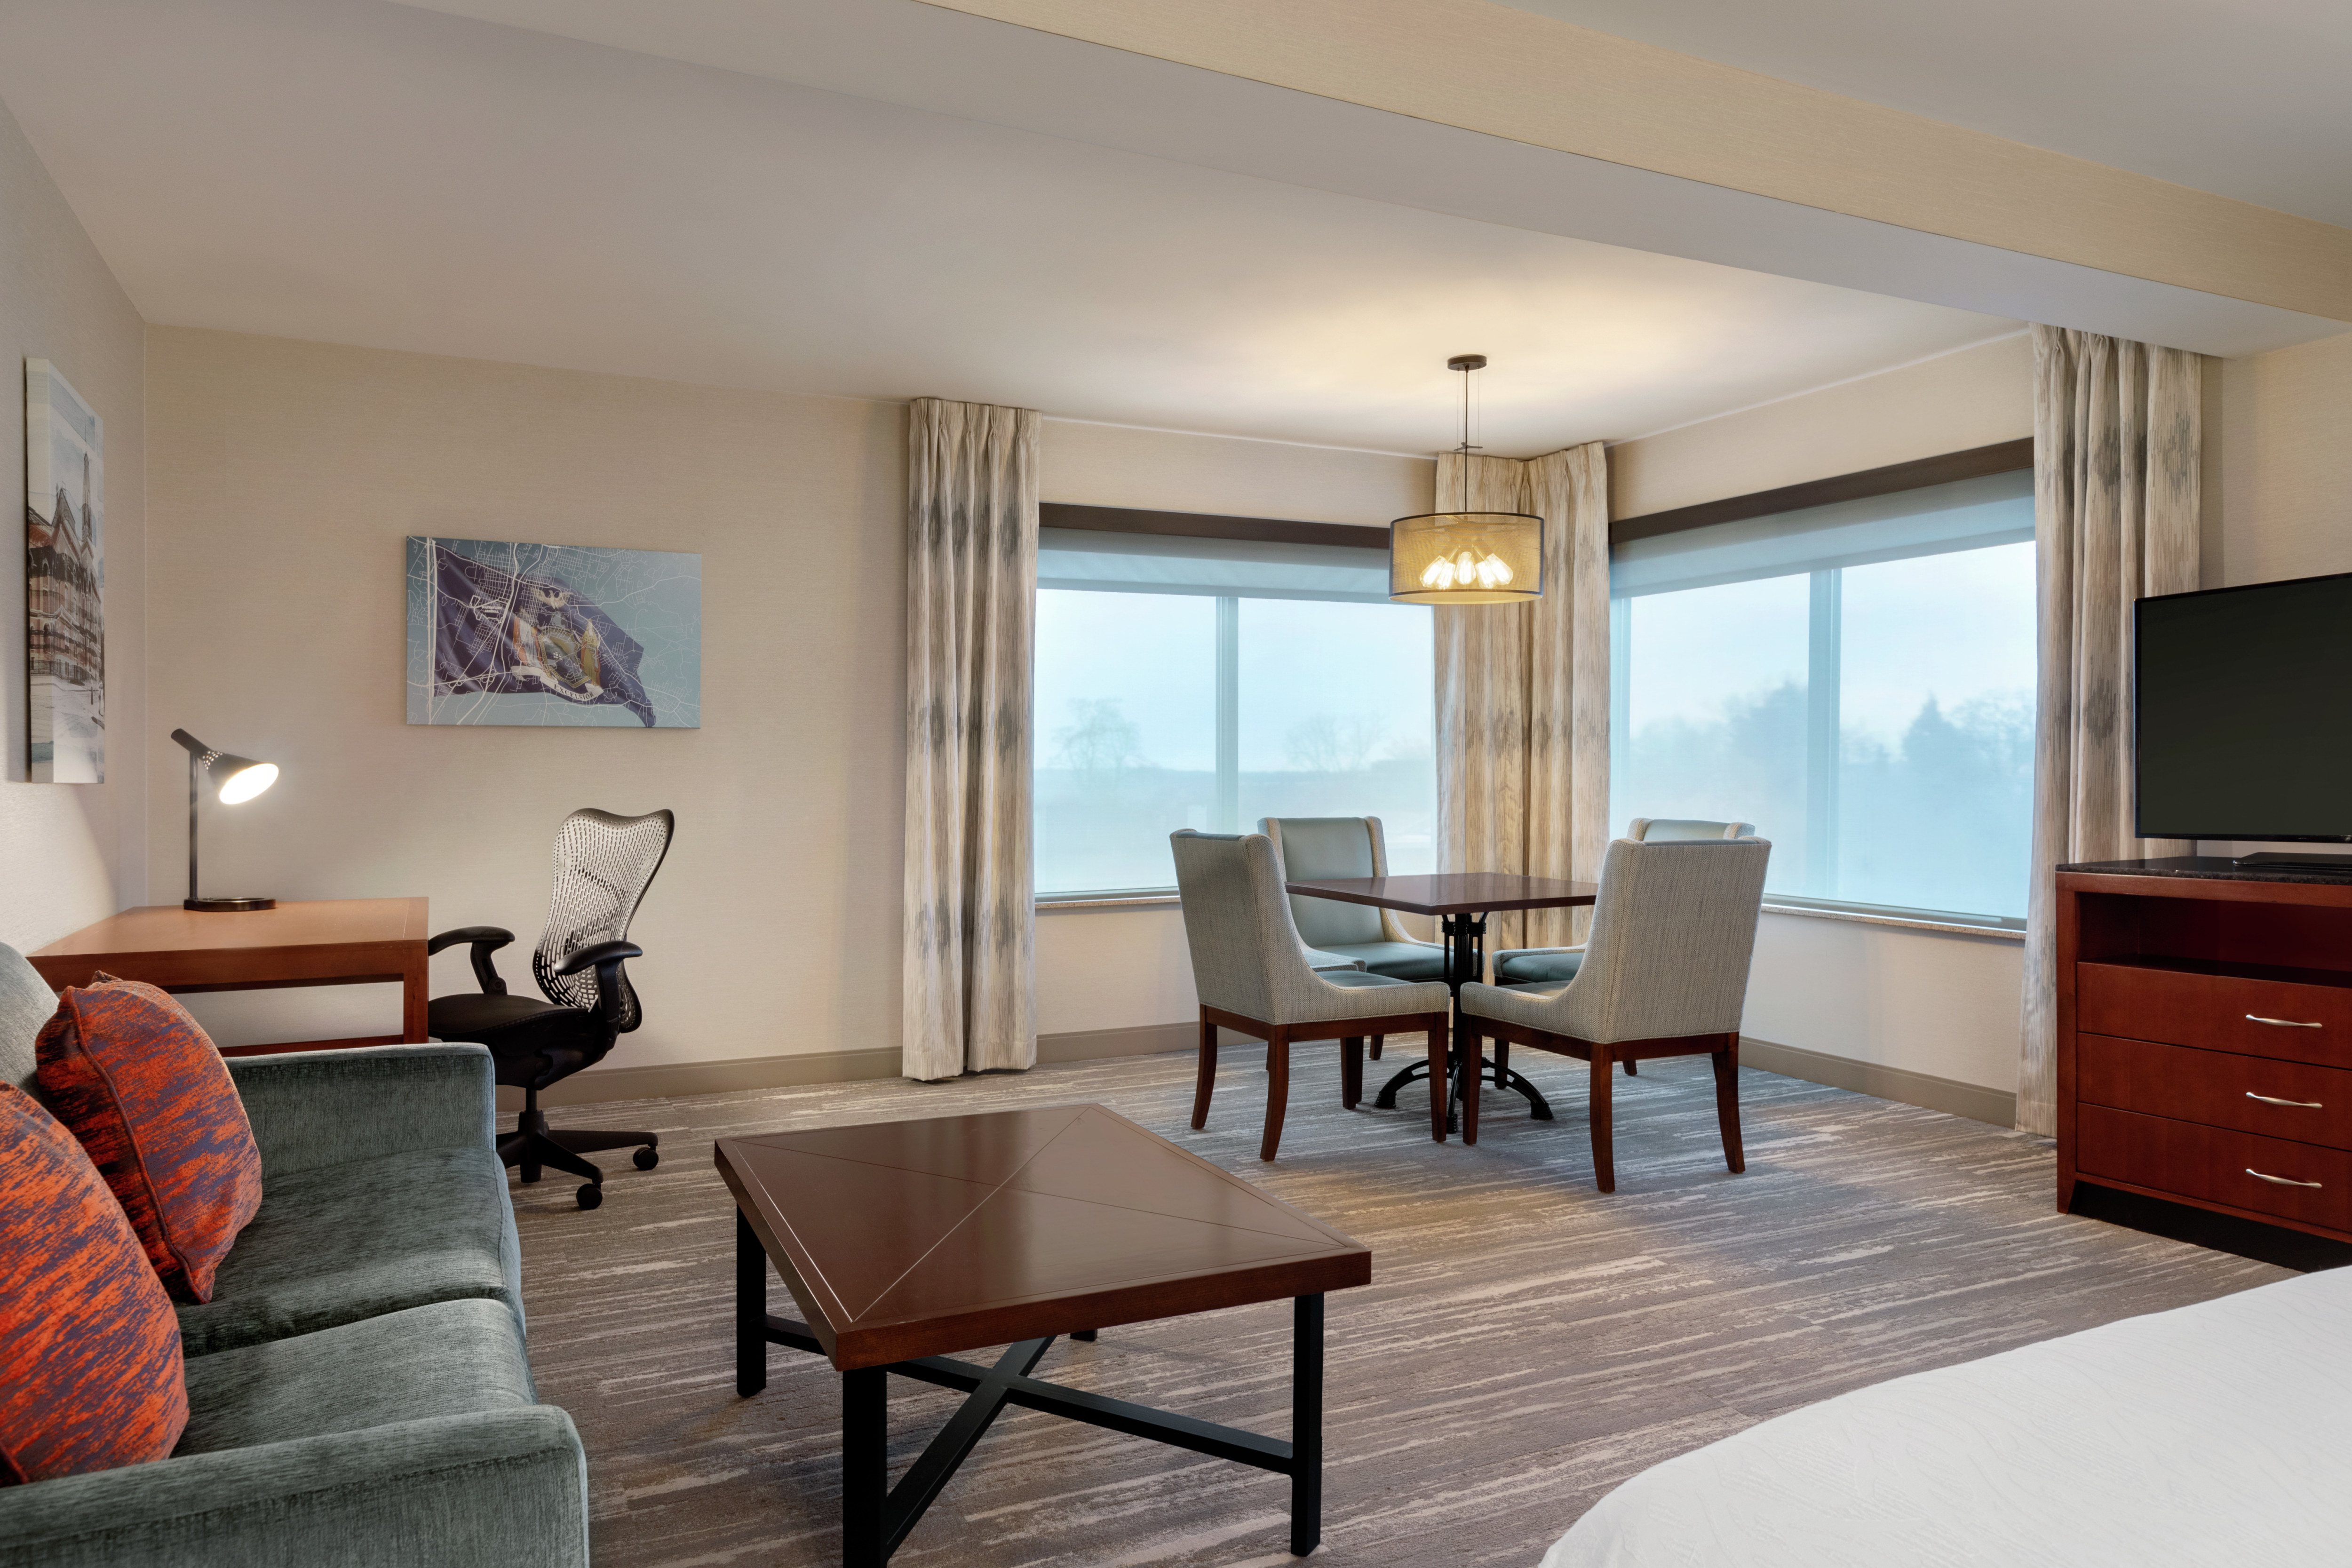 Spacious junior suite living area featuring large windows, dining table, sofa, TV, and work desk.